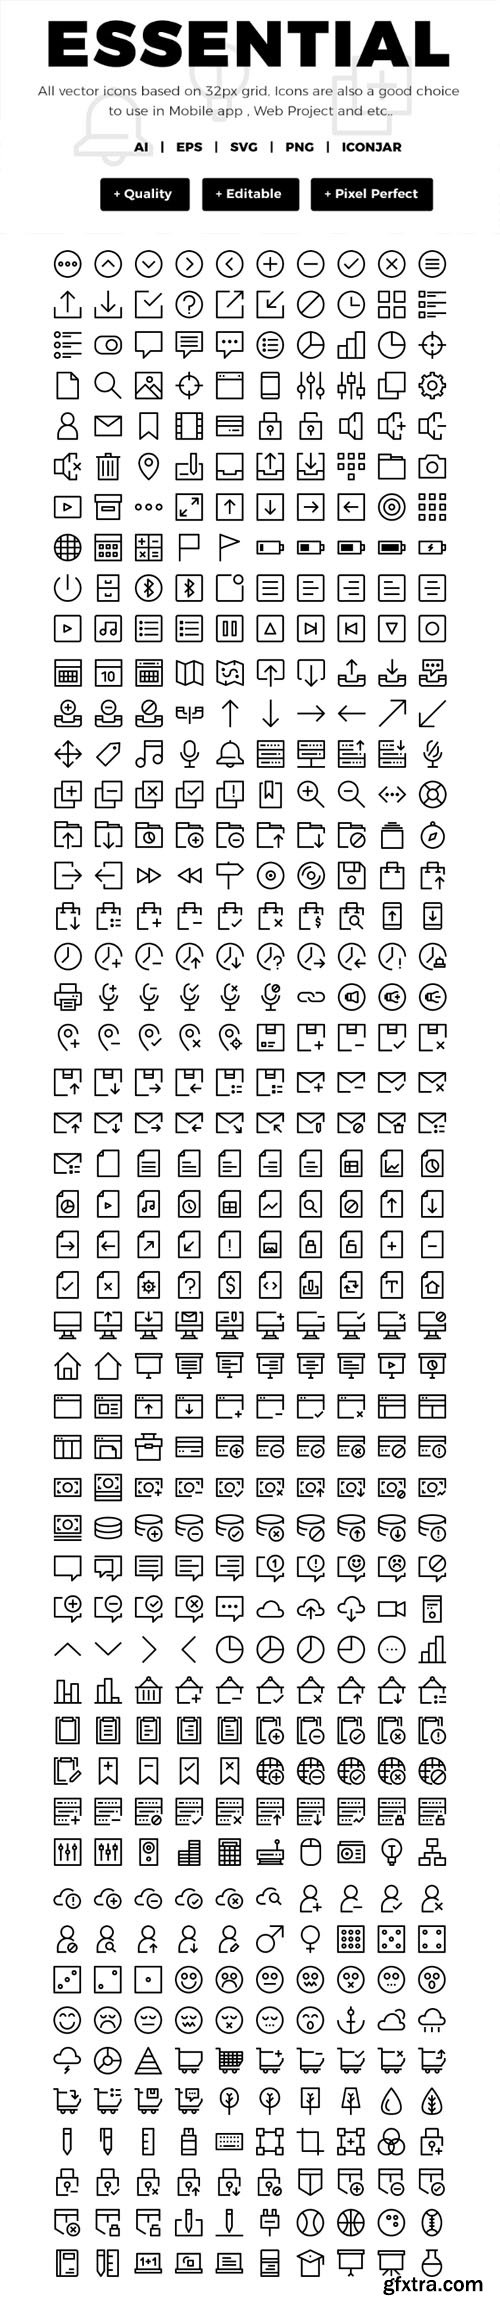 500 Essential Icons Collection [AI/EPS/SVG/PNG/Iconjar]